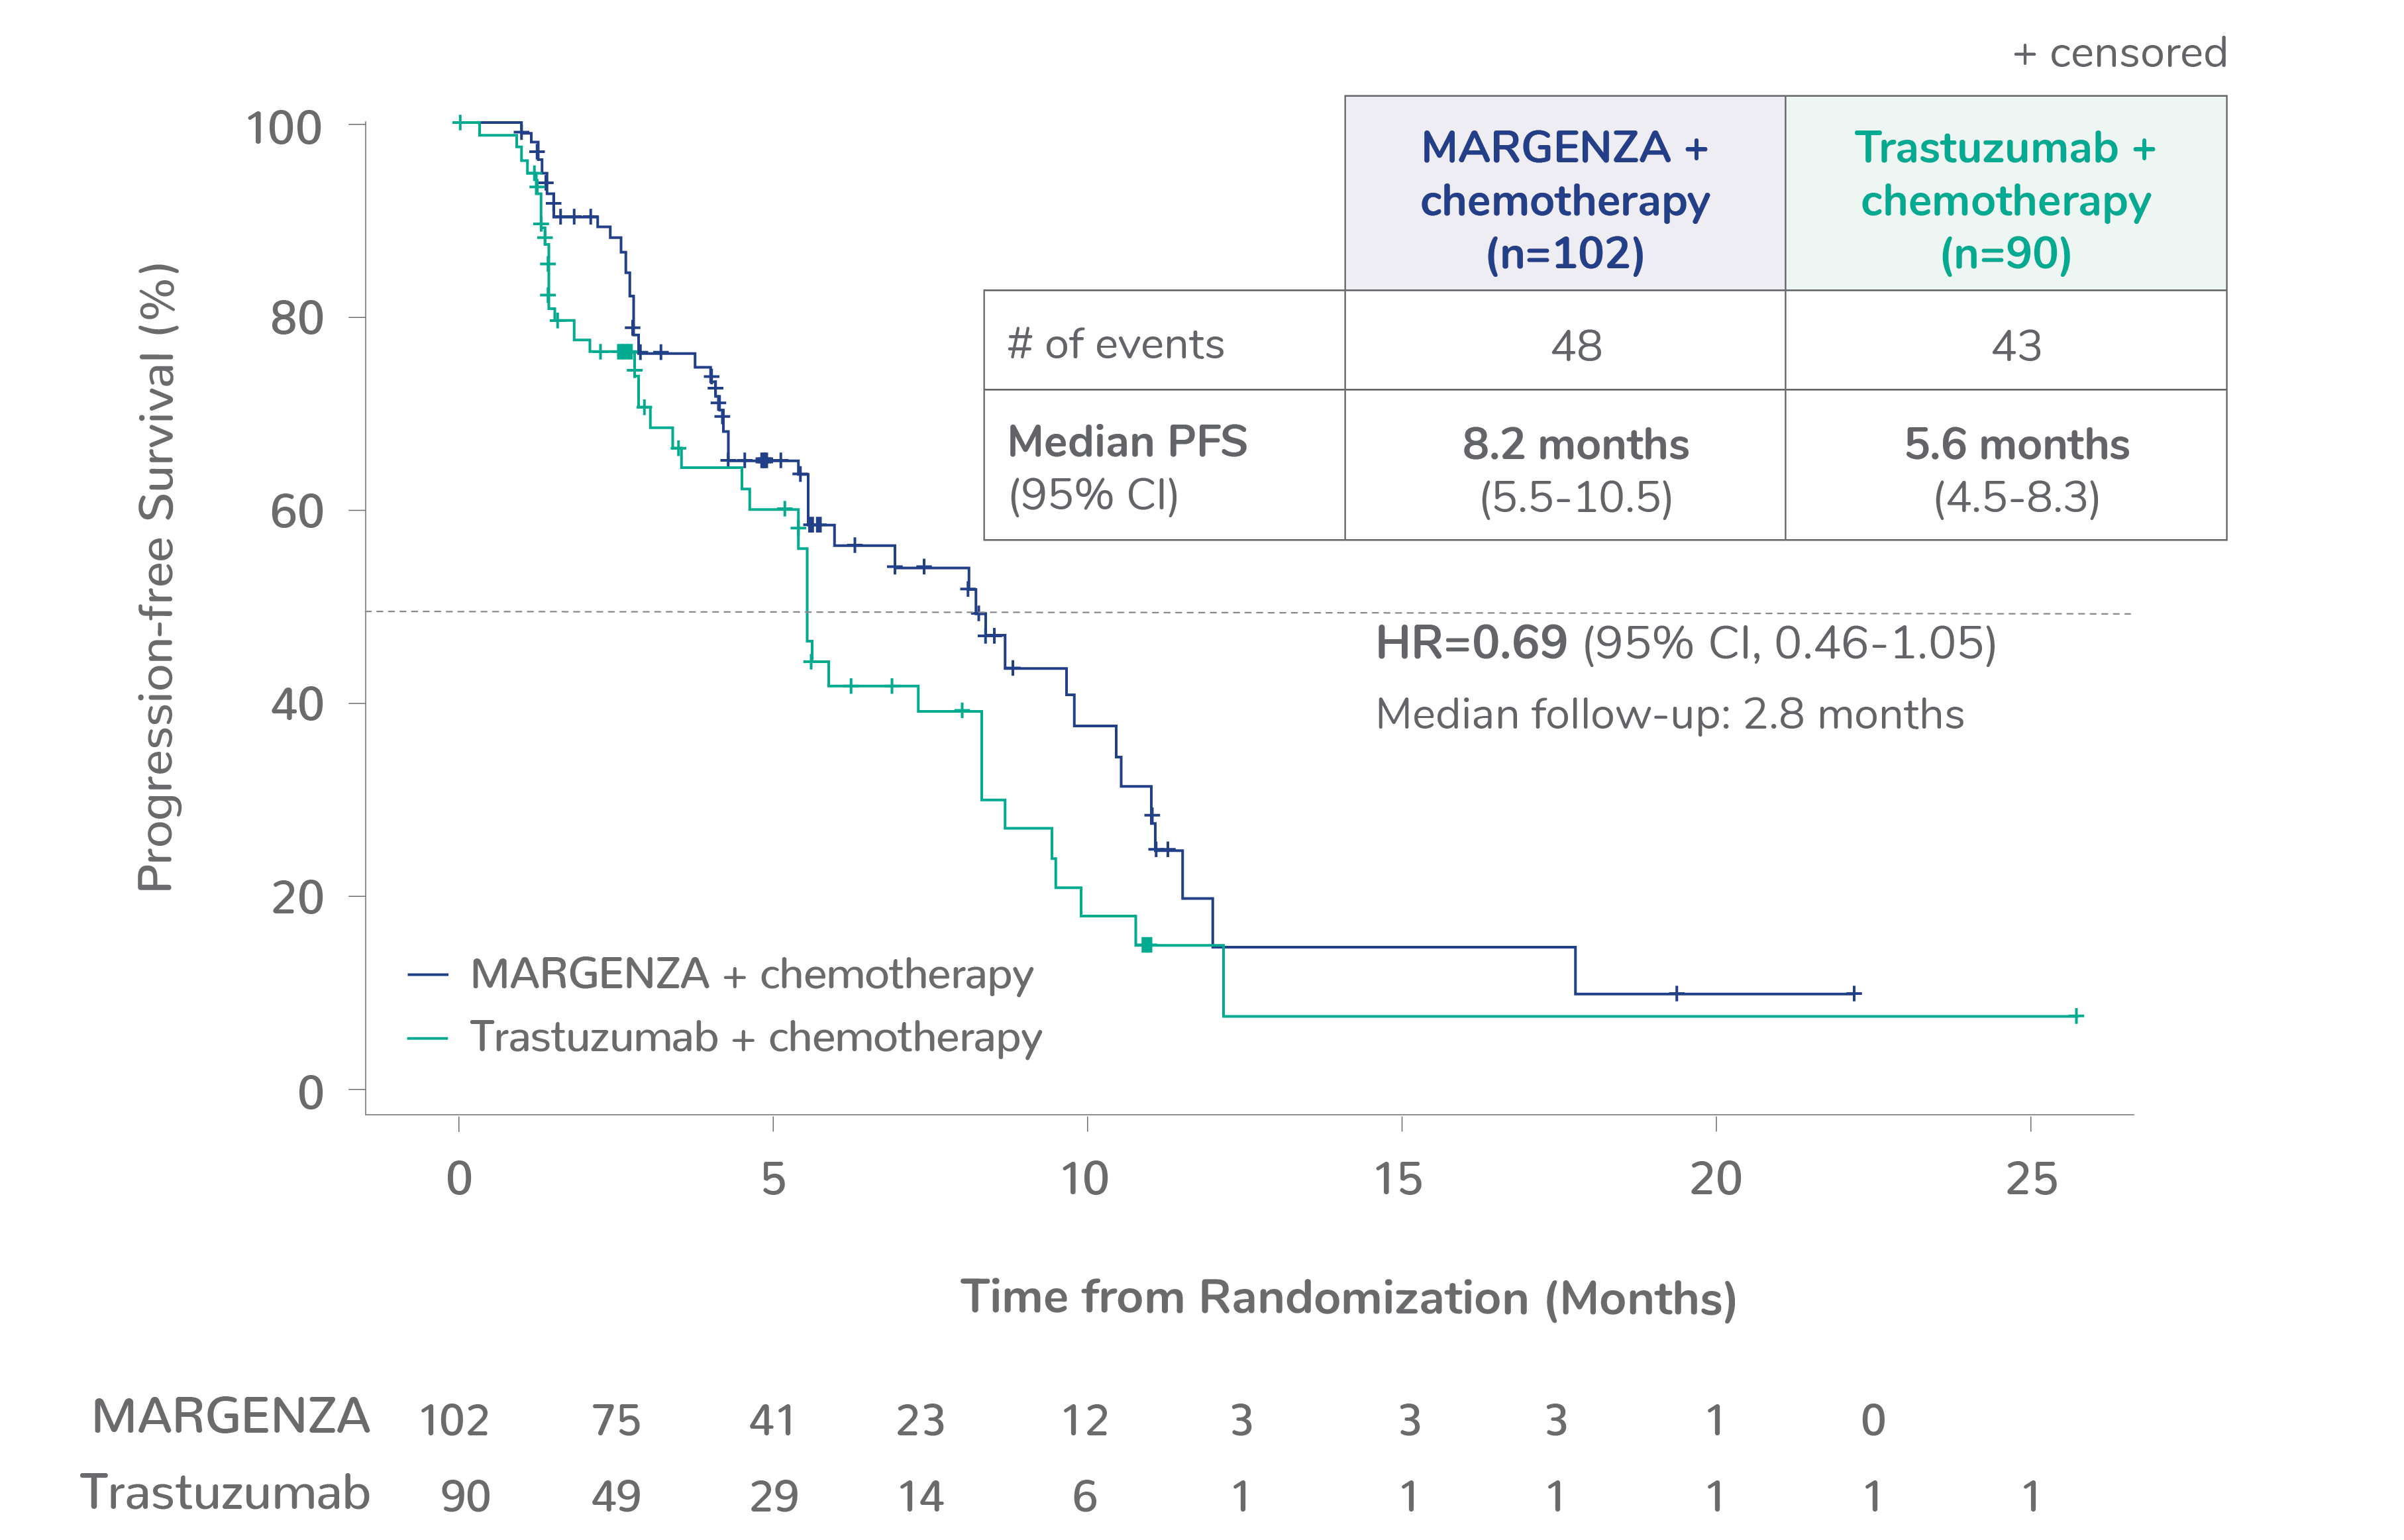 Kaplan Meyer curve showing median progression-free survival for CD16A FF genotype of 8.2 months for MARGENZA plus chemotherapy in 102 patients compared to 5.6 months for trastuzumab plus chemotherapy in 90 patients. The hazard ratio was 0.69. 